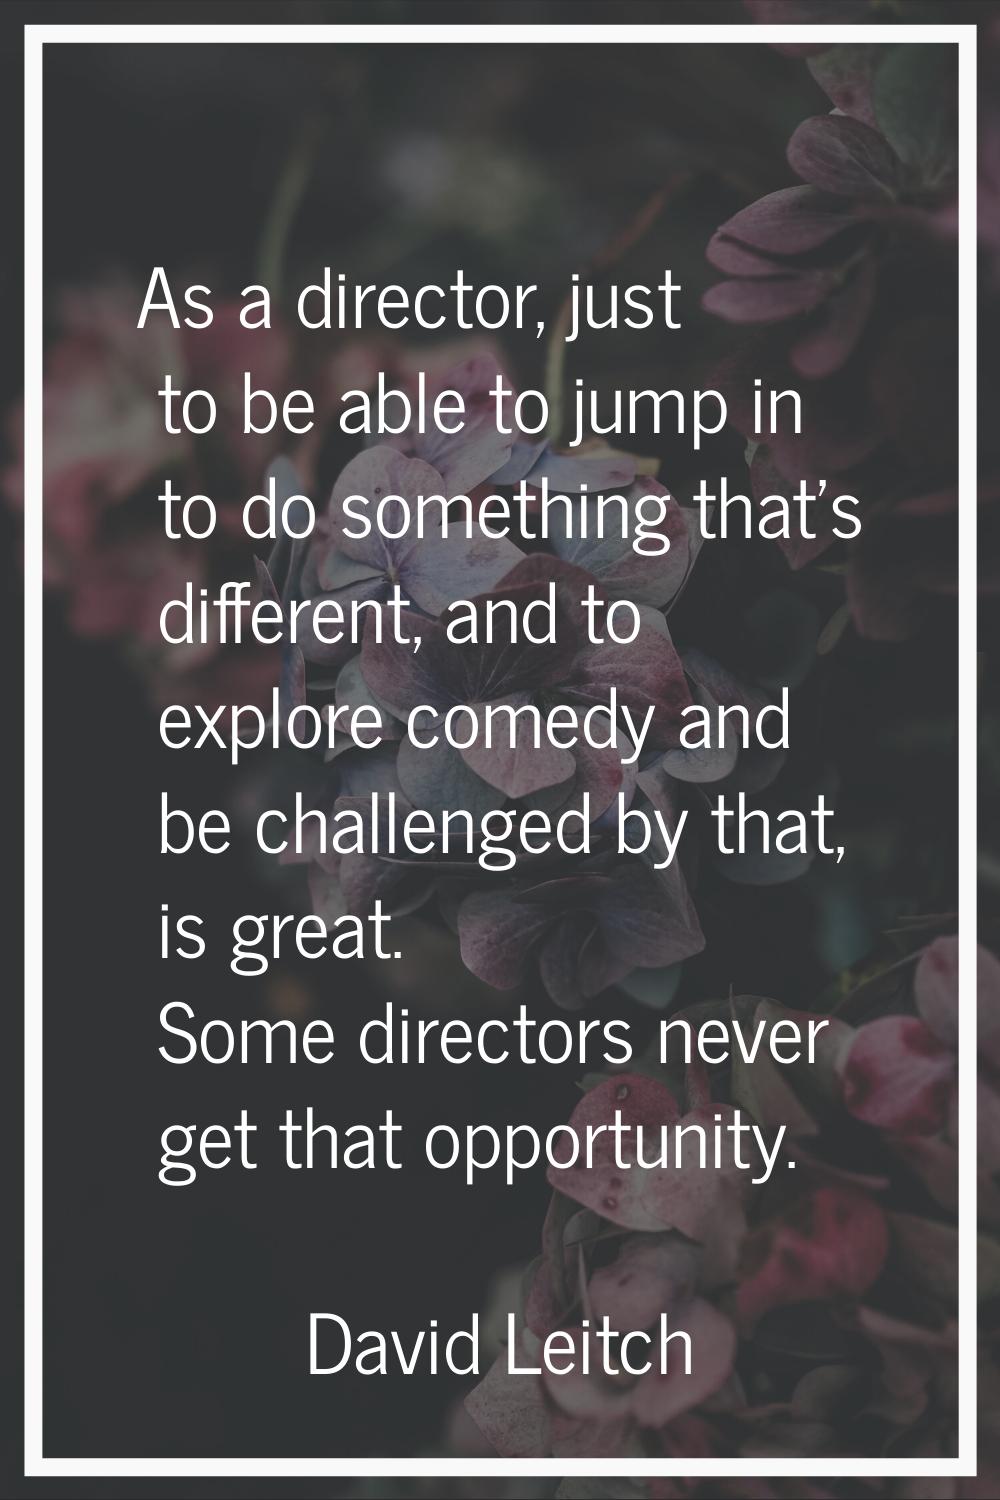 As a director, just to be able to jump in to do something that's different, and to explore comedy a